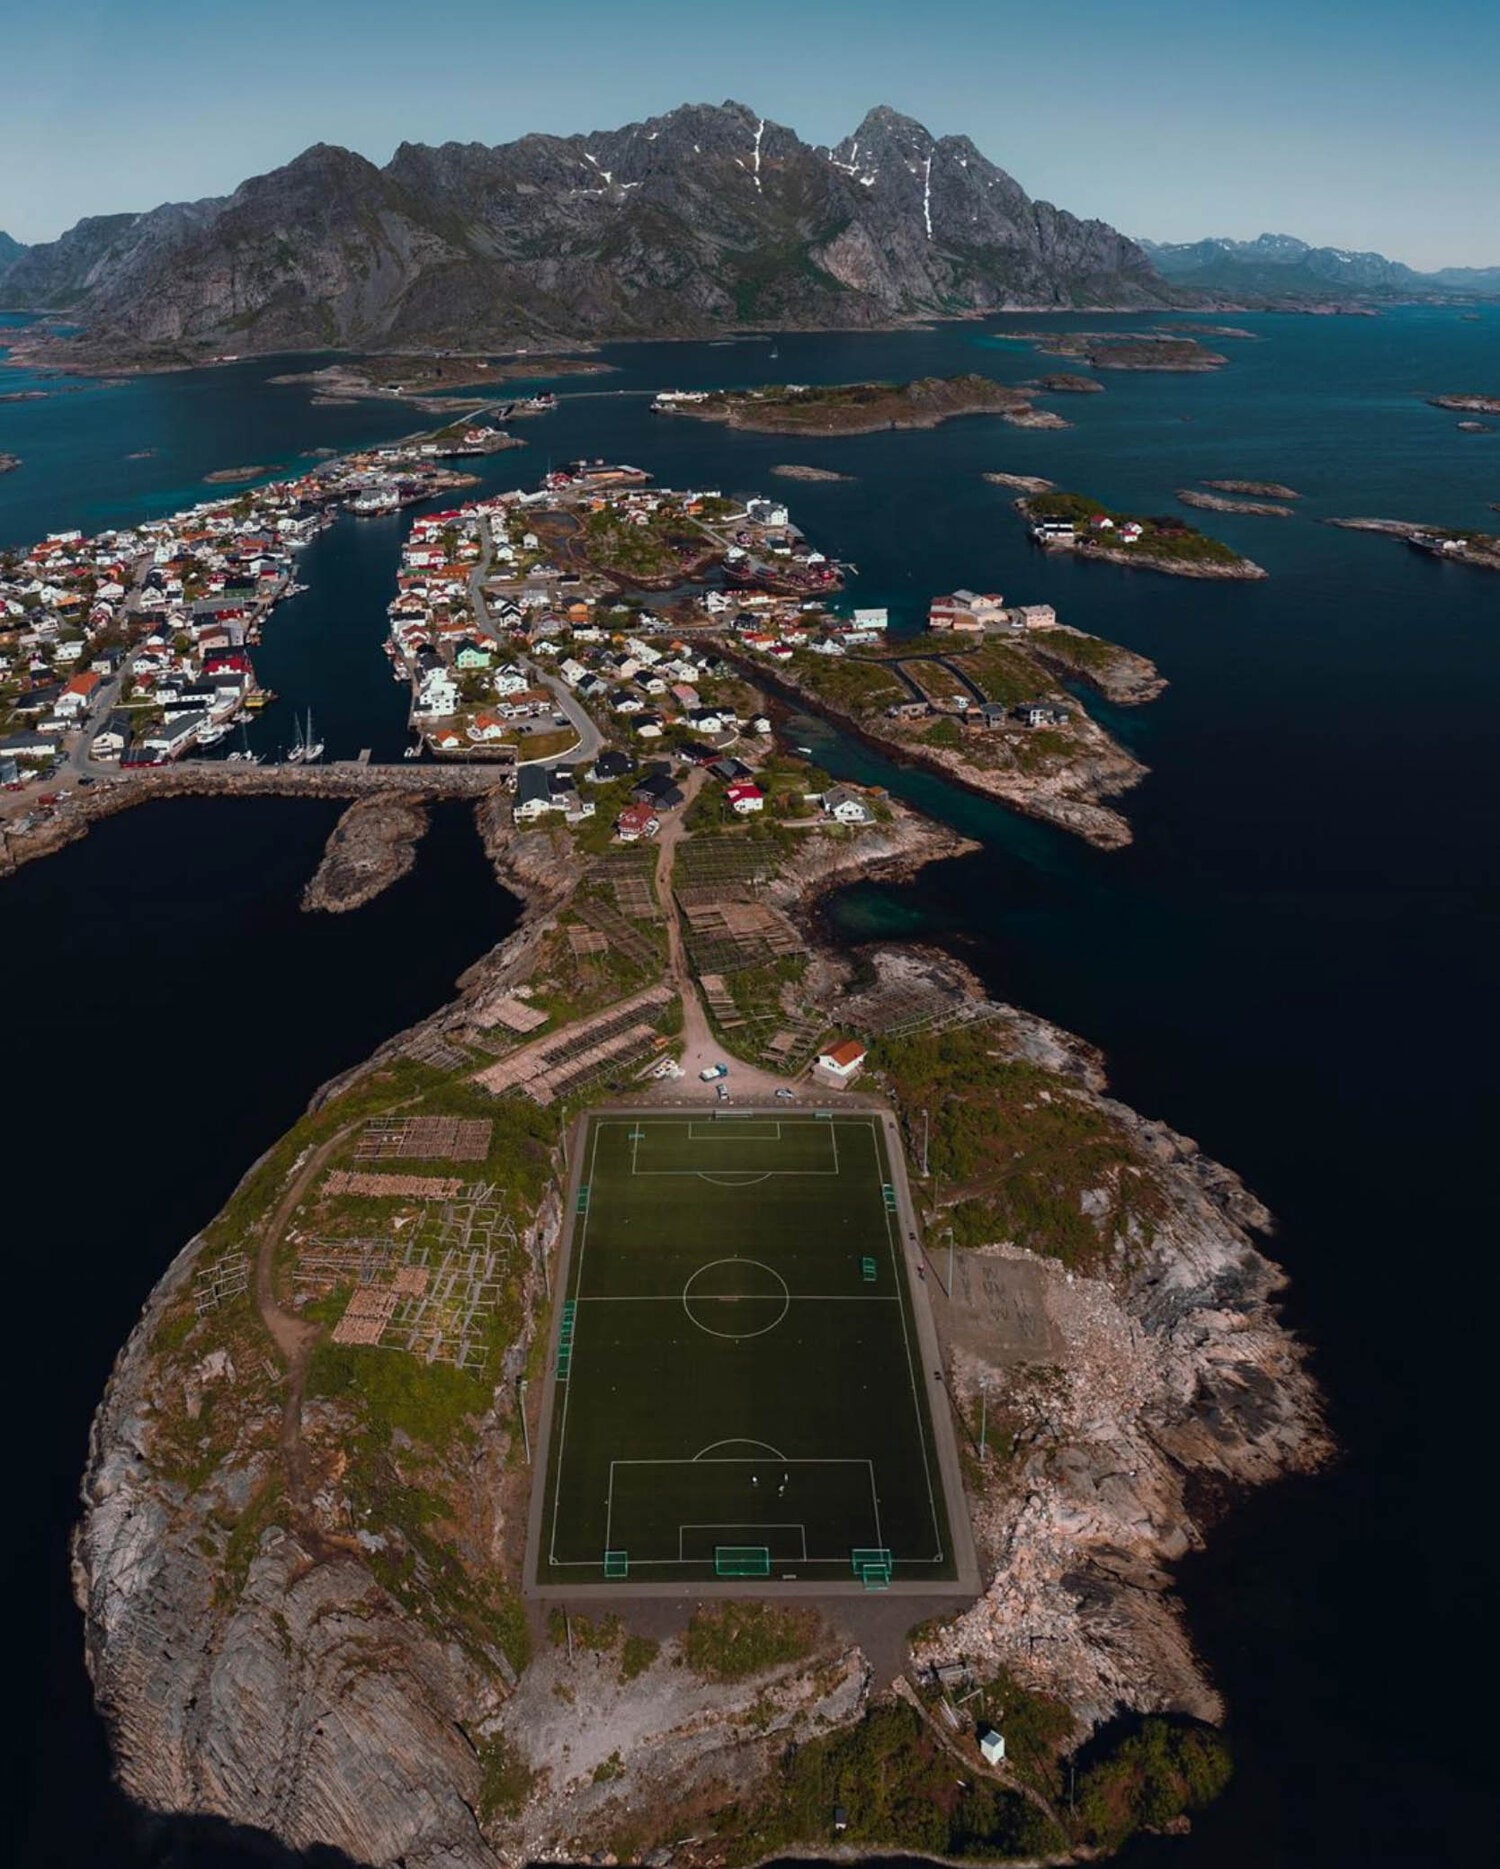 The football pitch in Lofoten, Norway - most unusually located football pitch